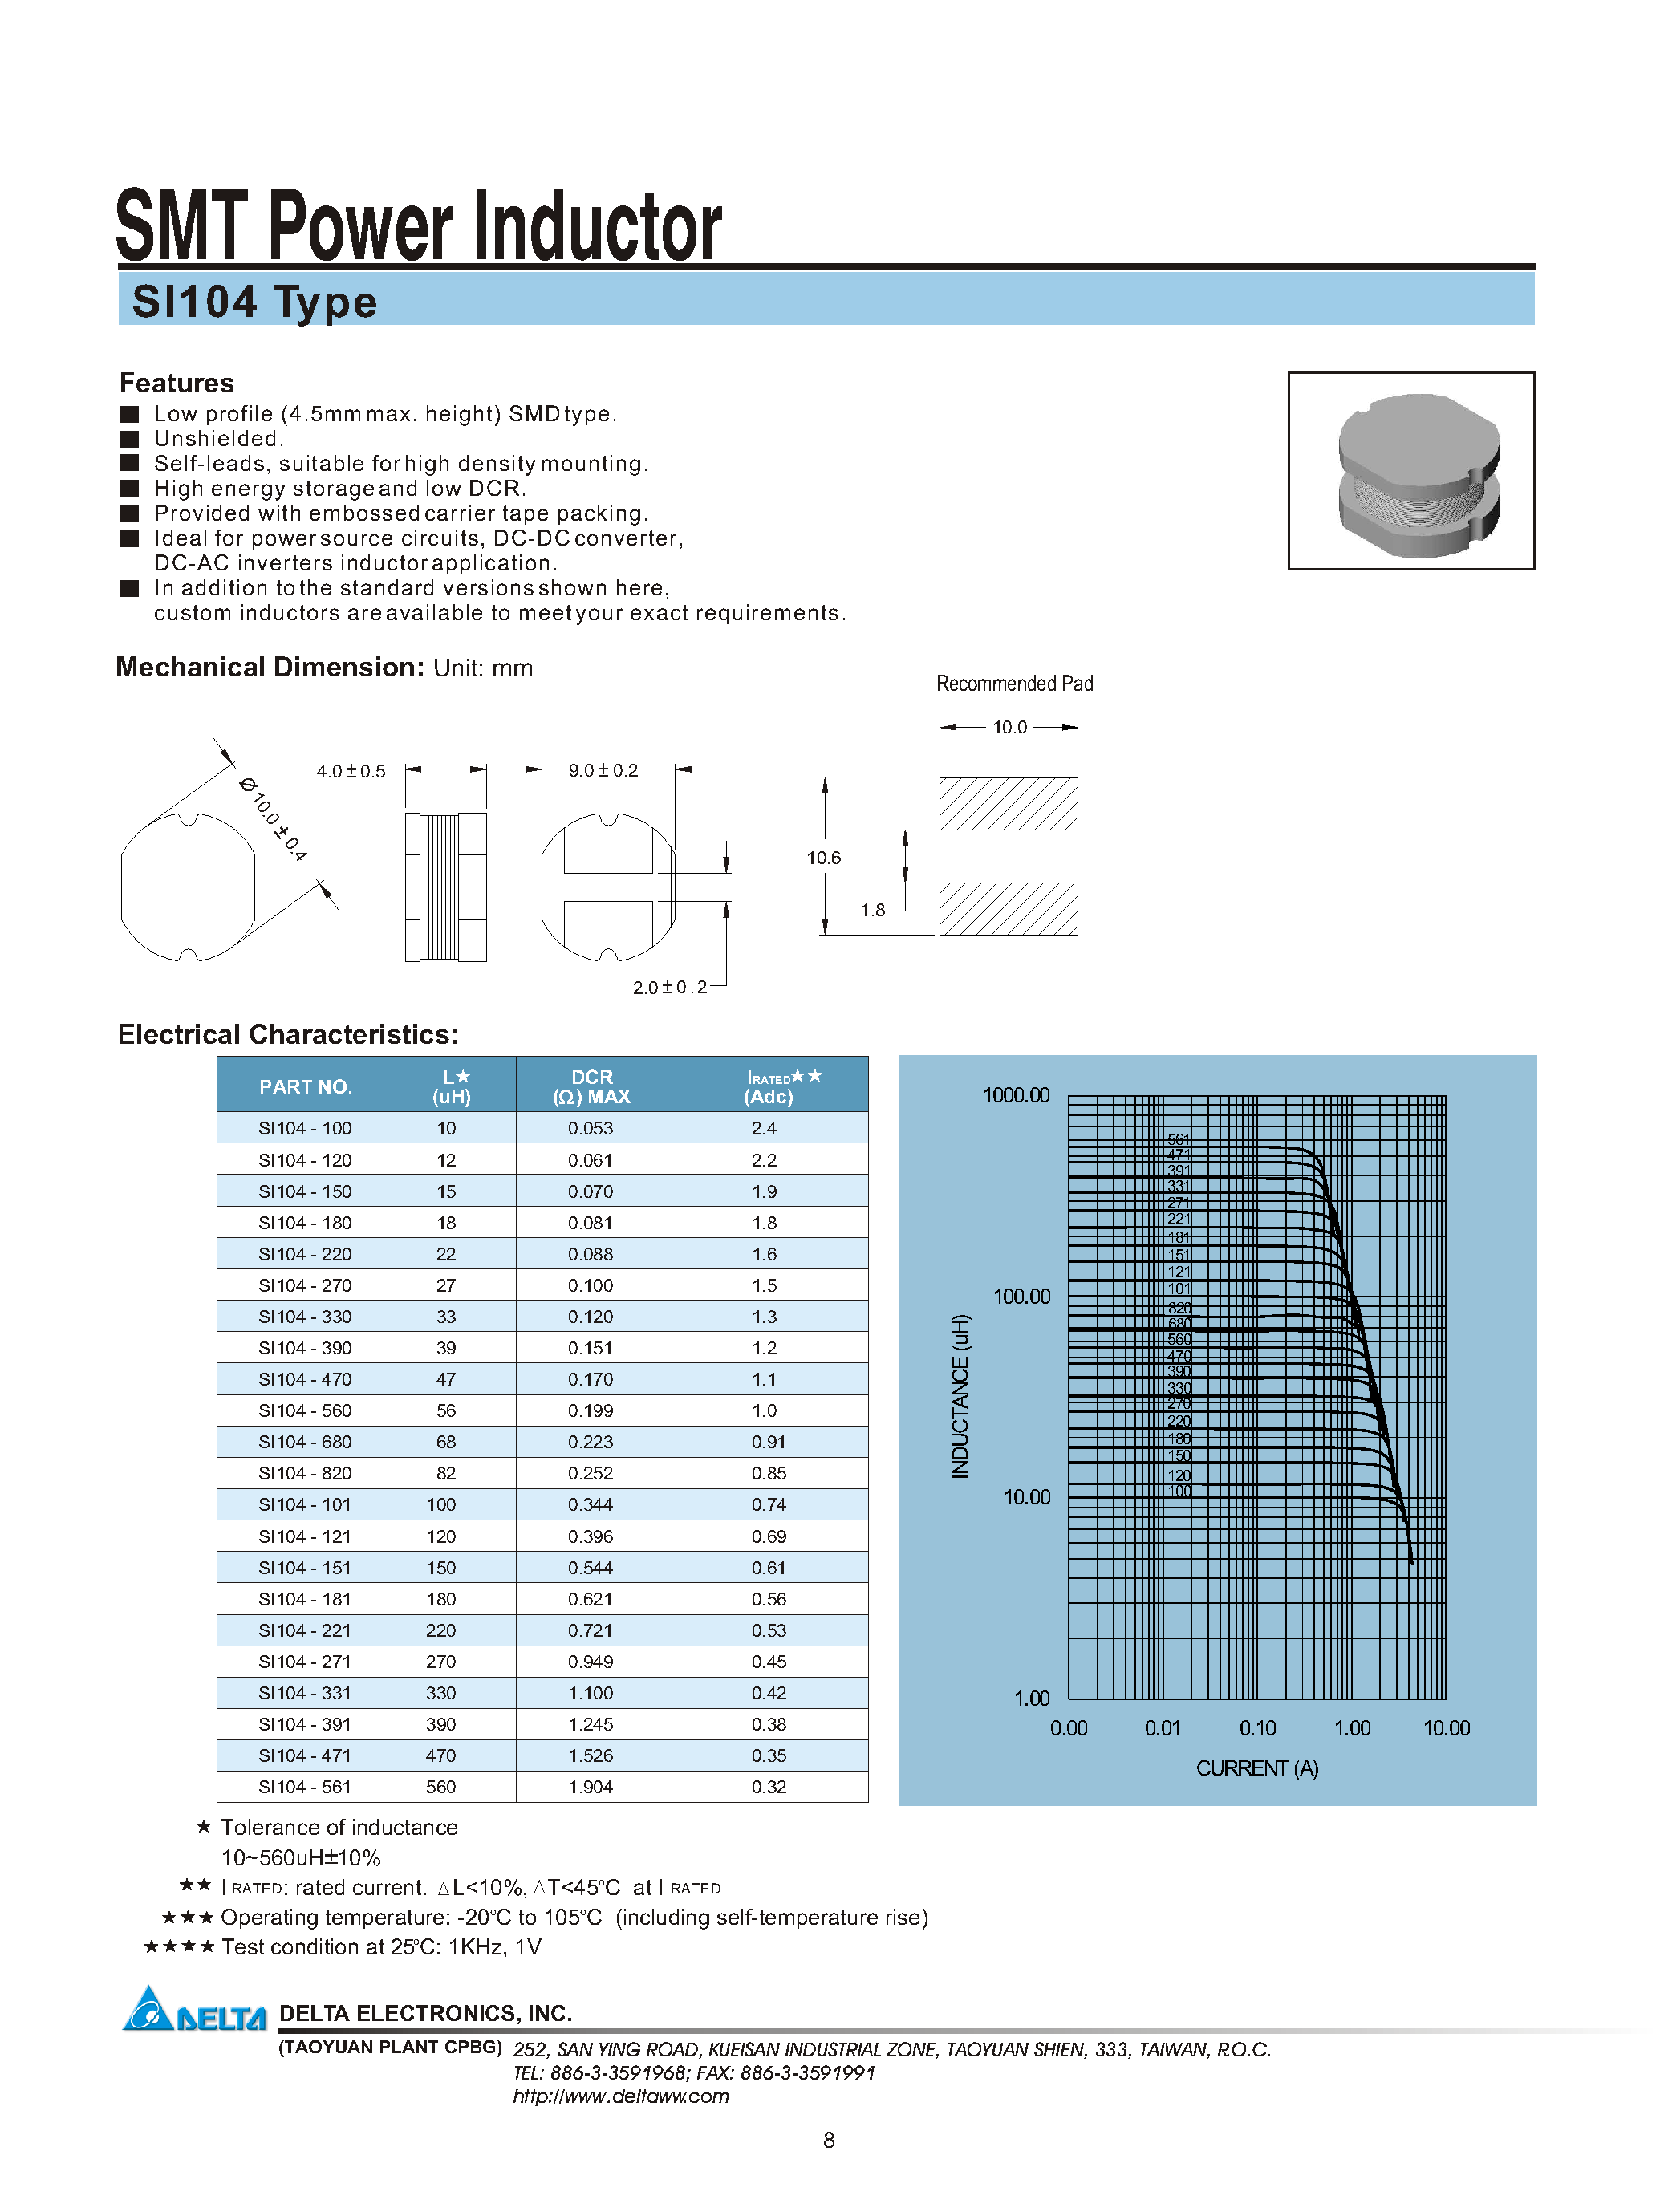 Datasheet SI104-150 - SMT Power Inductor page 1